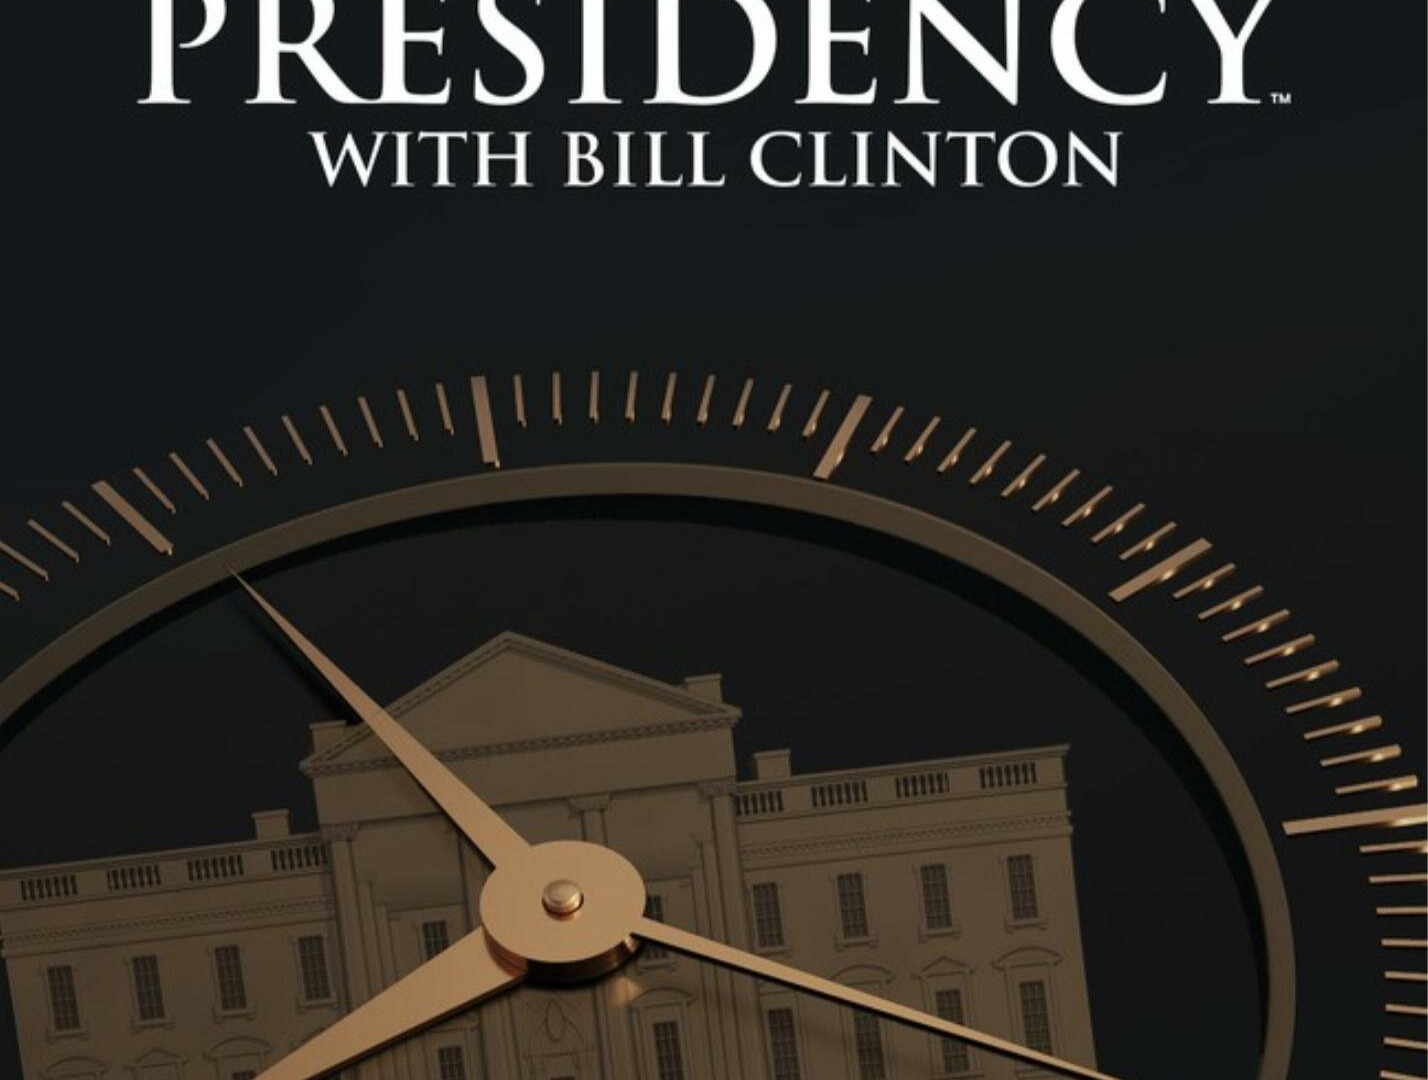 Show The American Presidency with Bill Clinton